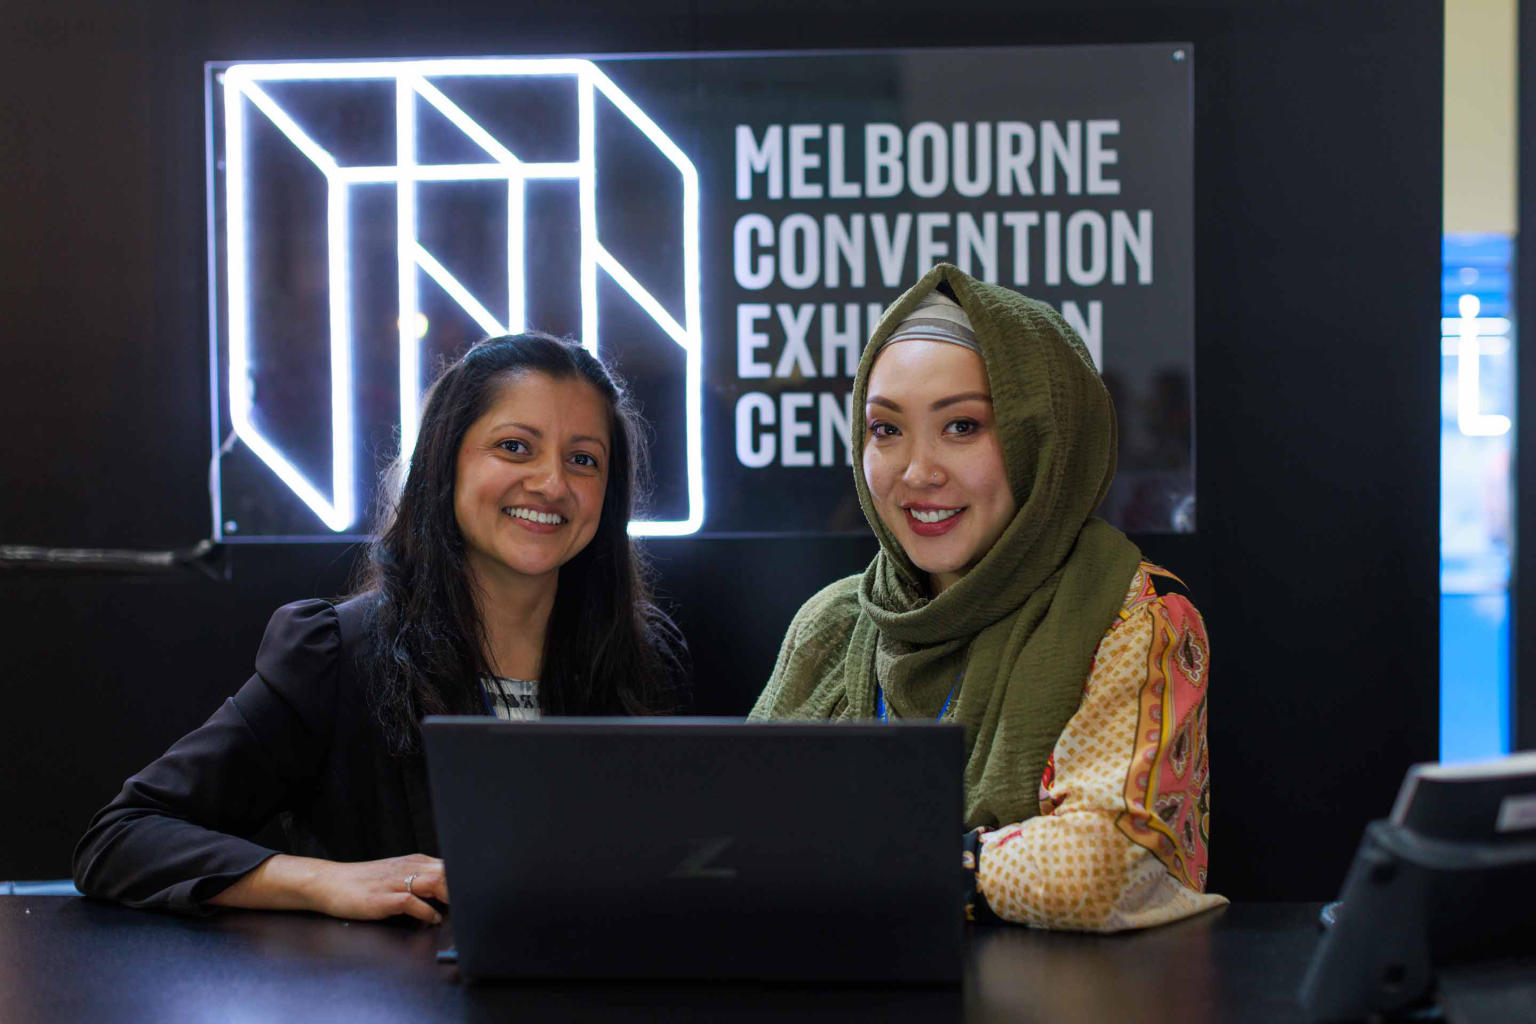 Celebrate Diversity and inclusion at MCEC